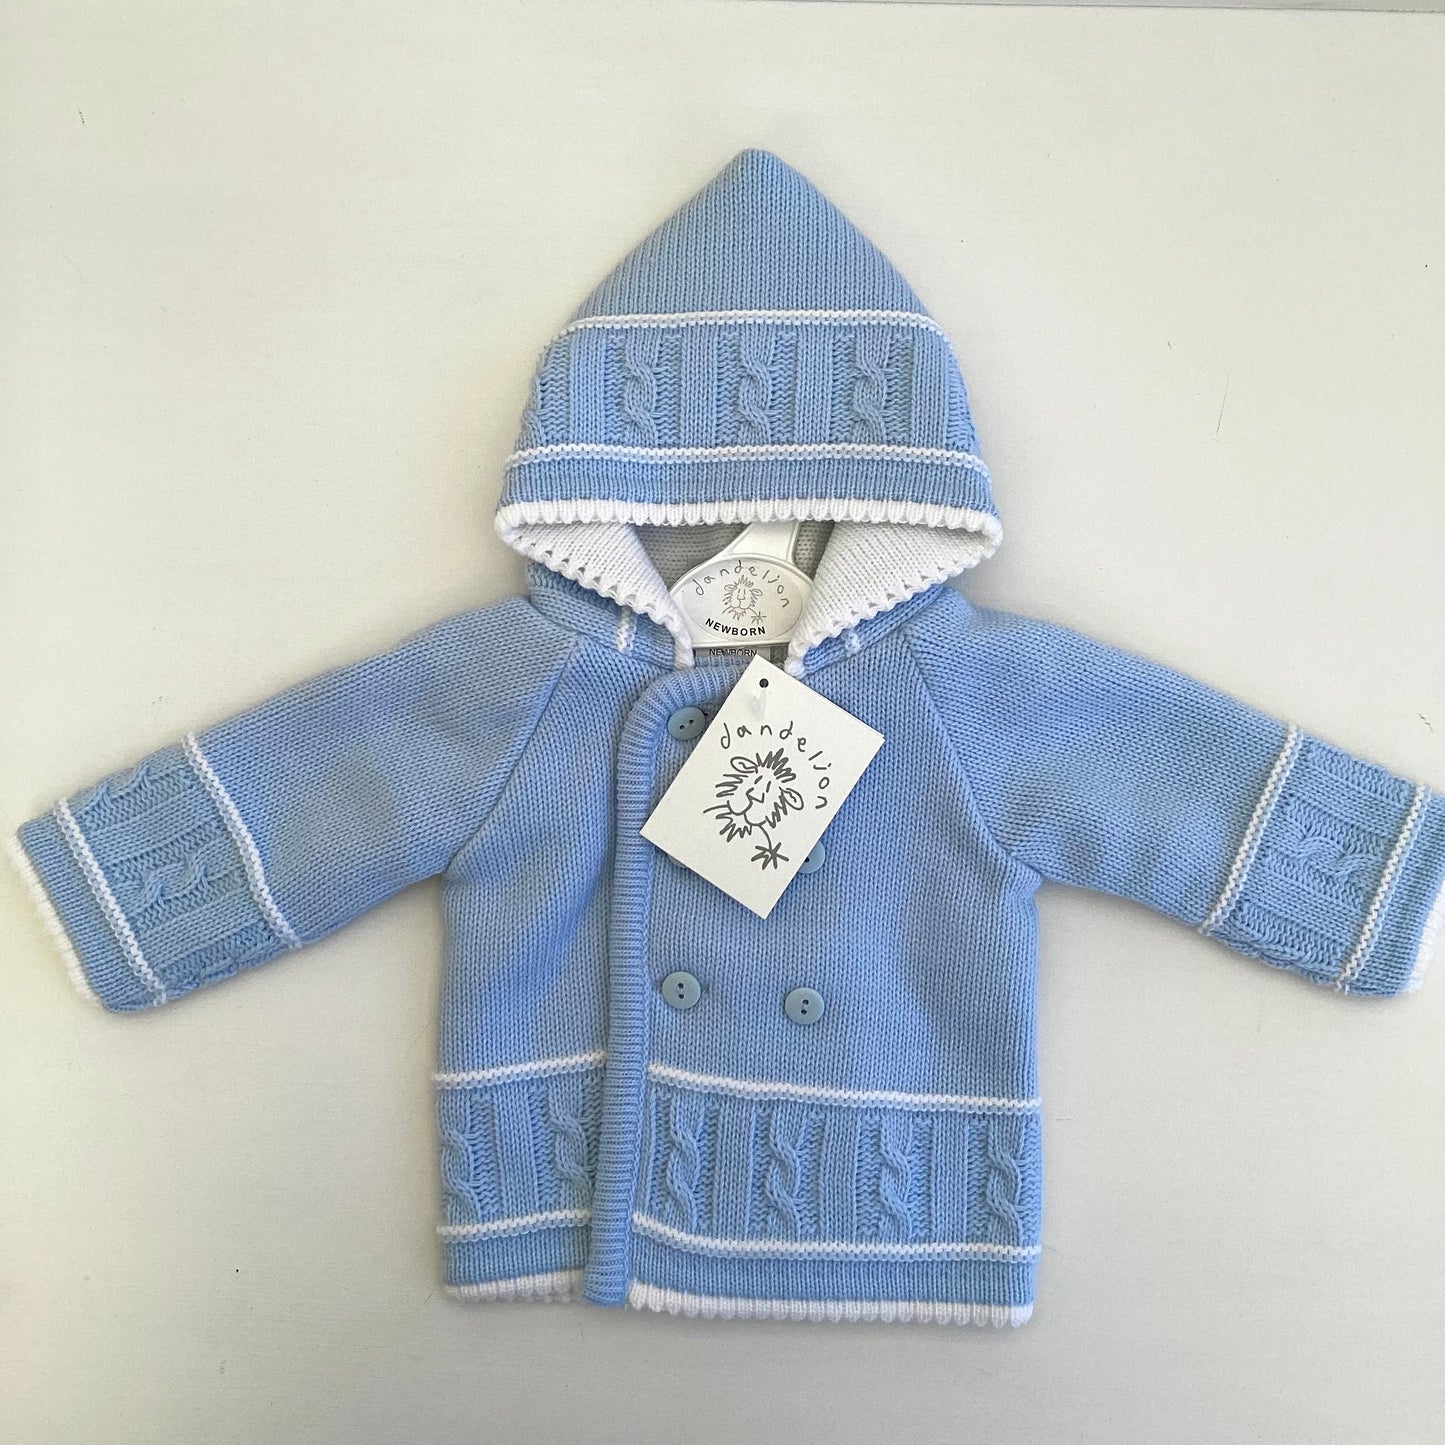 SEB - Blue Dandelion luxury knitted jacket and essentials gift box